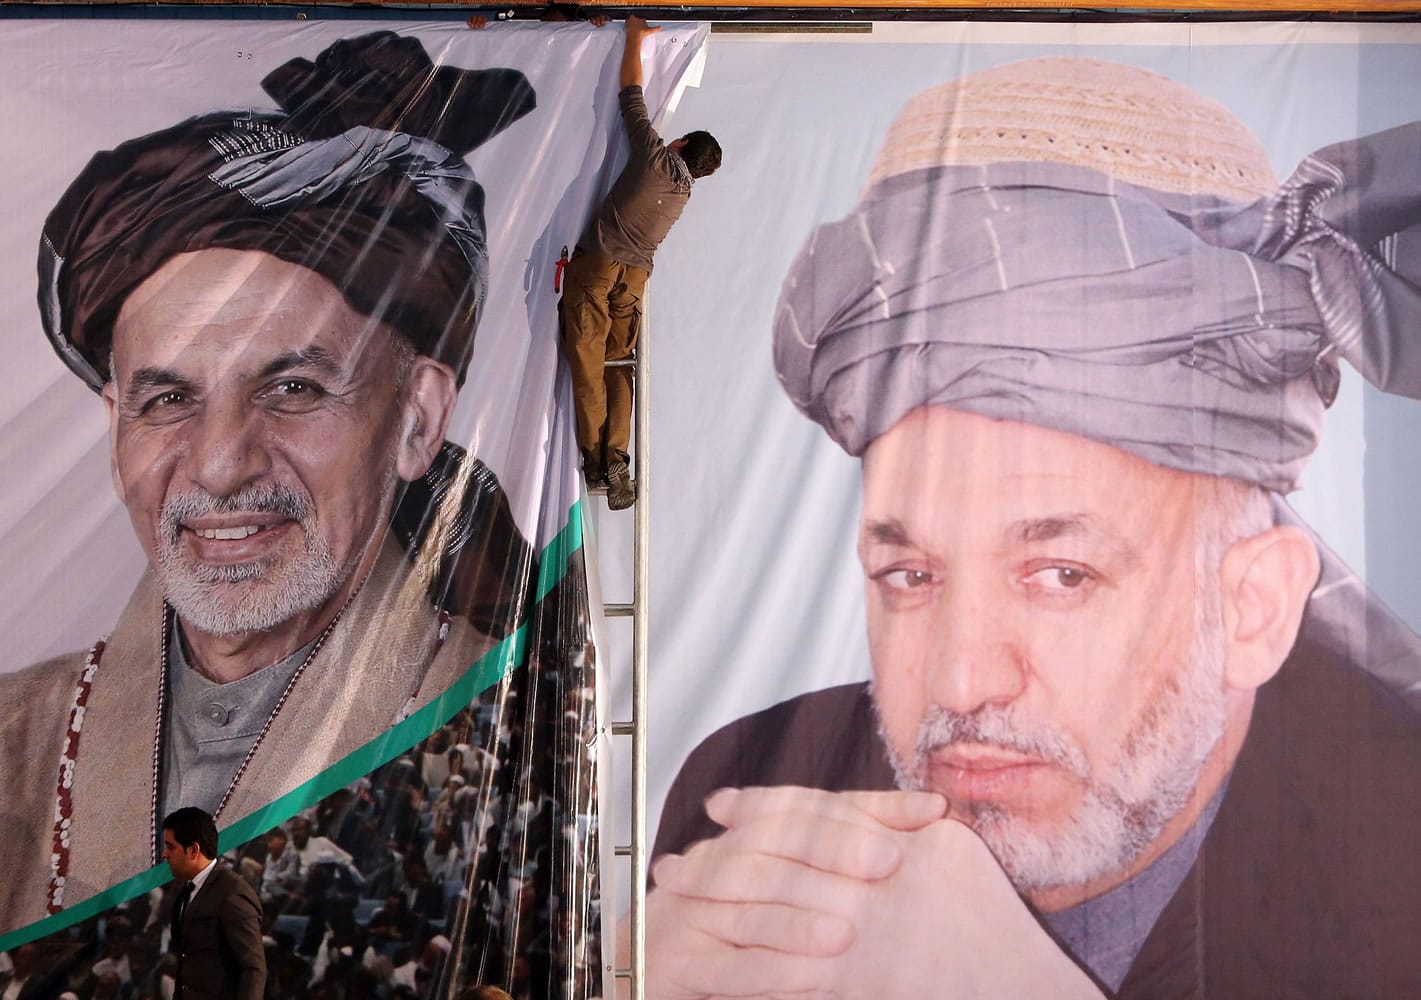 An Afghan boy prepares a banner of Afghan president-elect, Ashraf Ghani Ahmadzai, next to a banner of outgoing President Hamid Karzai during his first public appearance since winning the election runoff in Kabul, Afghanistan, on Monday.